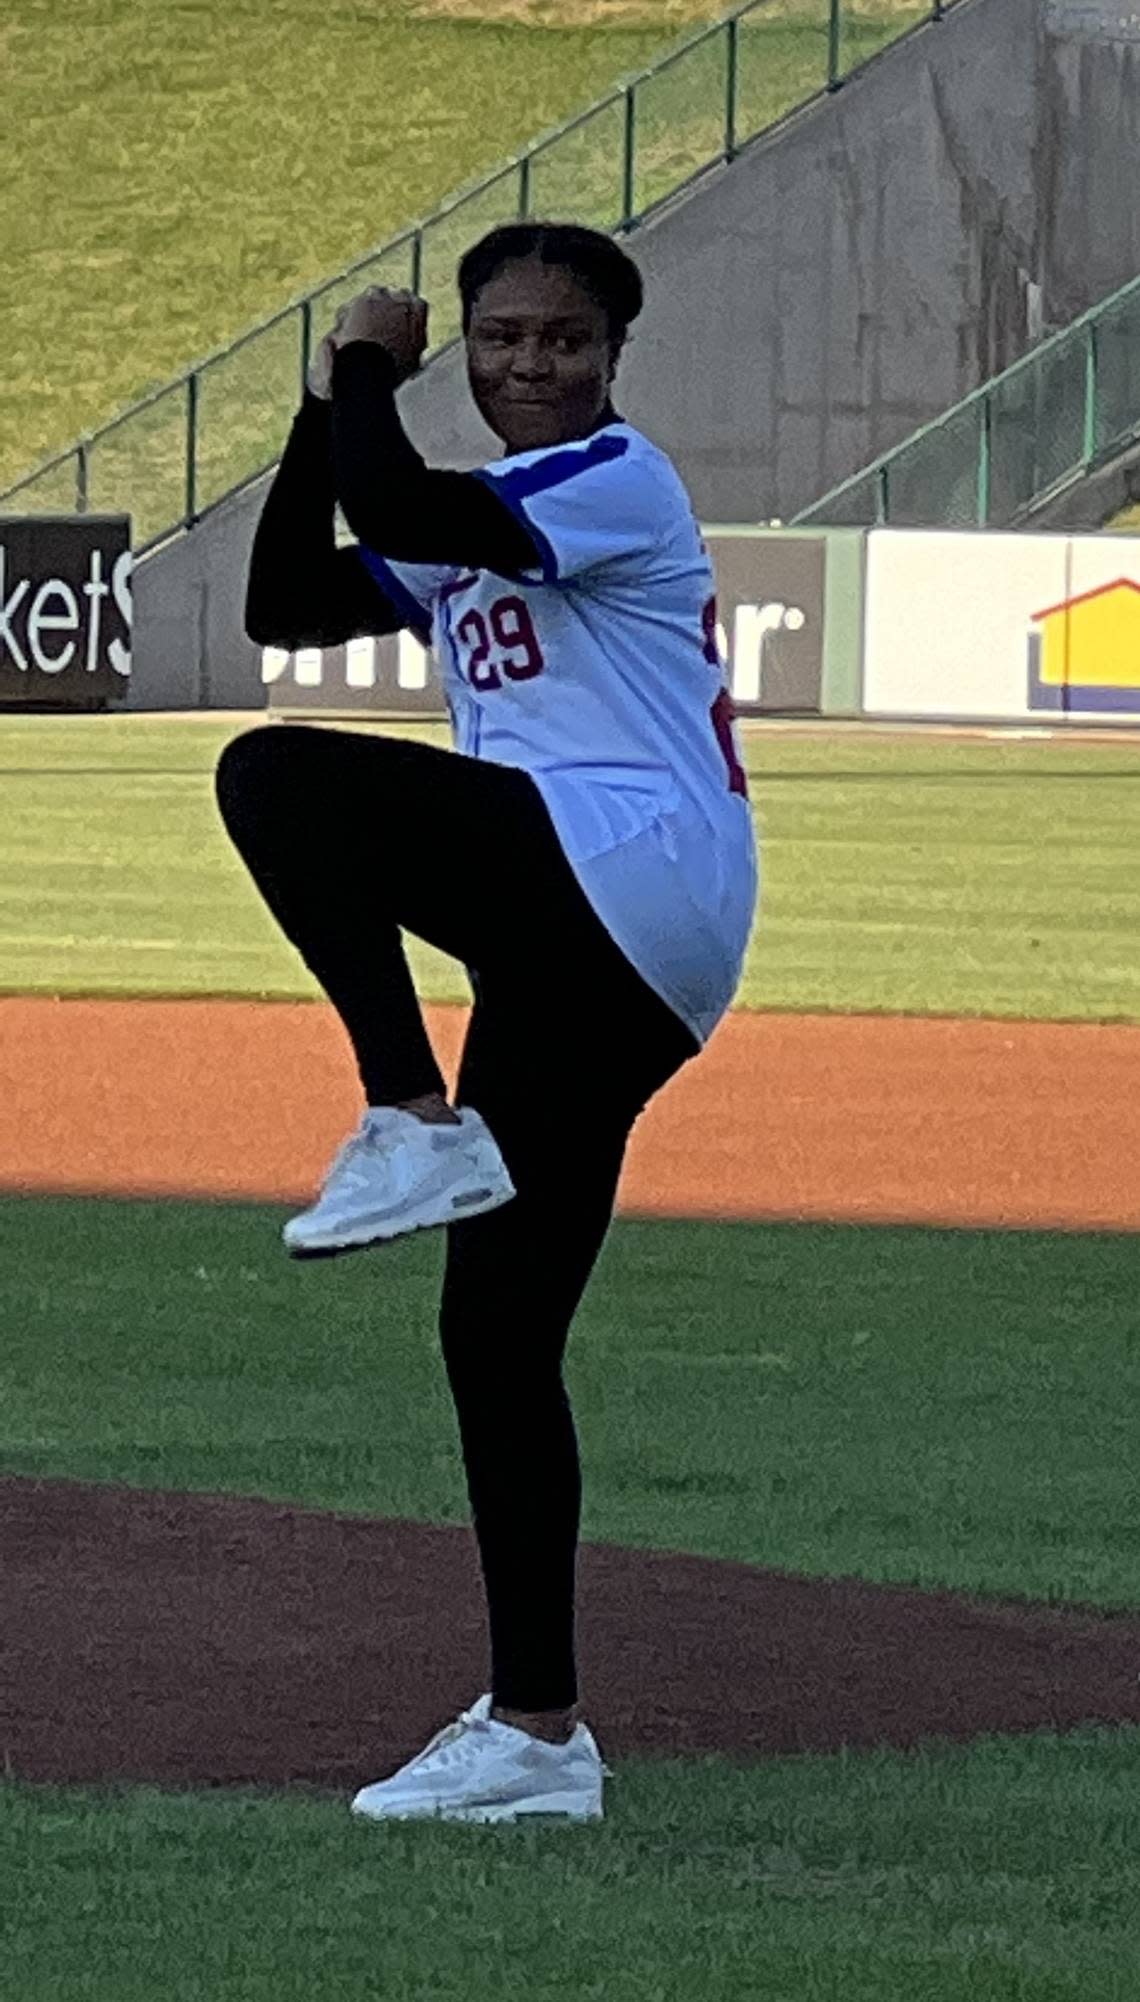 Jaeda LaVonne, who will portray Toni Stone in the Unicorn Theatre’s play, showed good form throwing out the first pitch at a recent Kansas City Monarchs minor league game even though she has no background in baseball. Unicorn Theatre